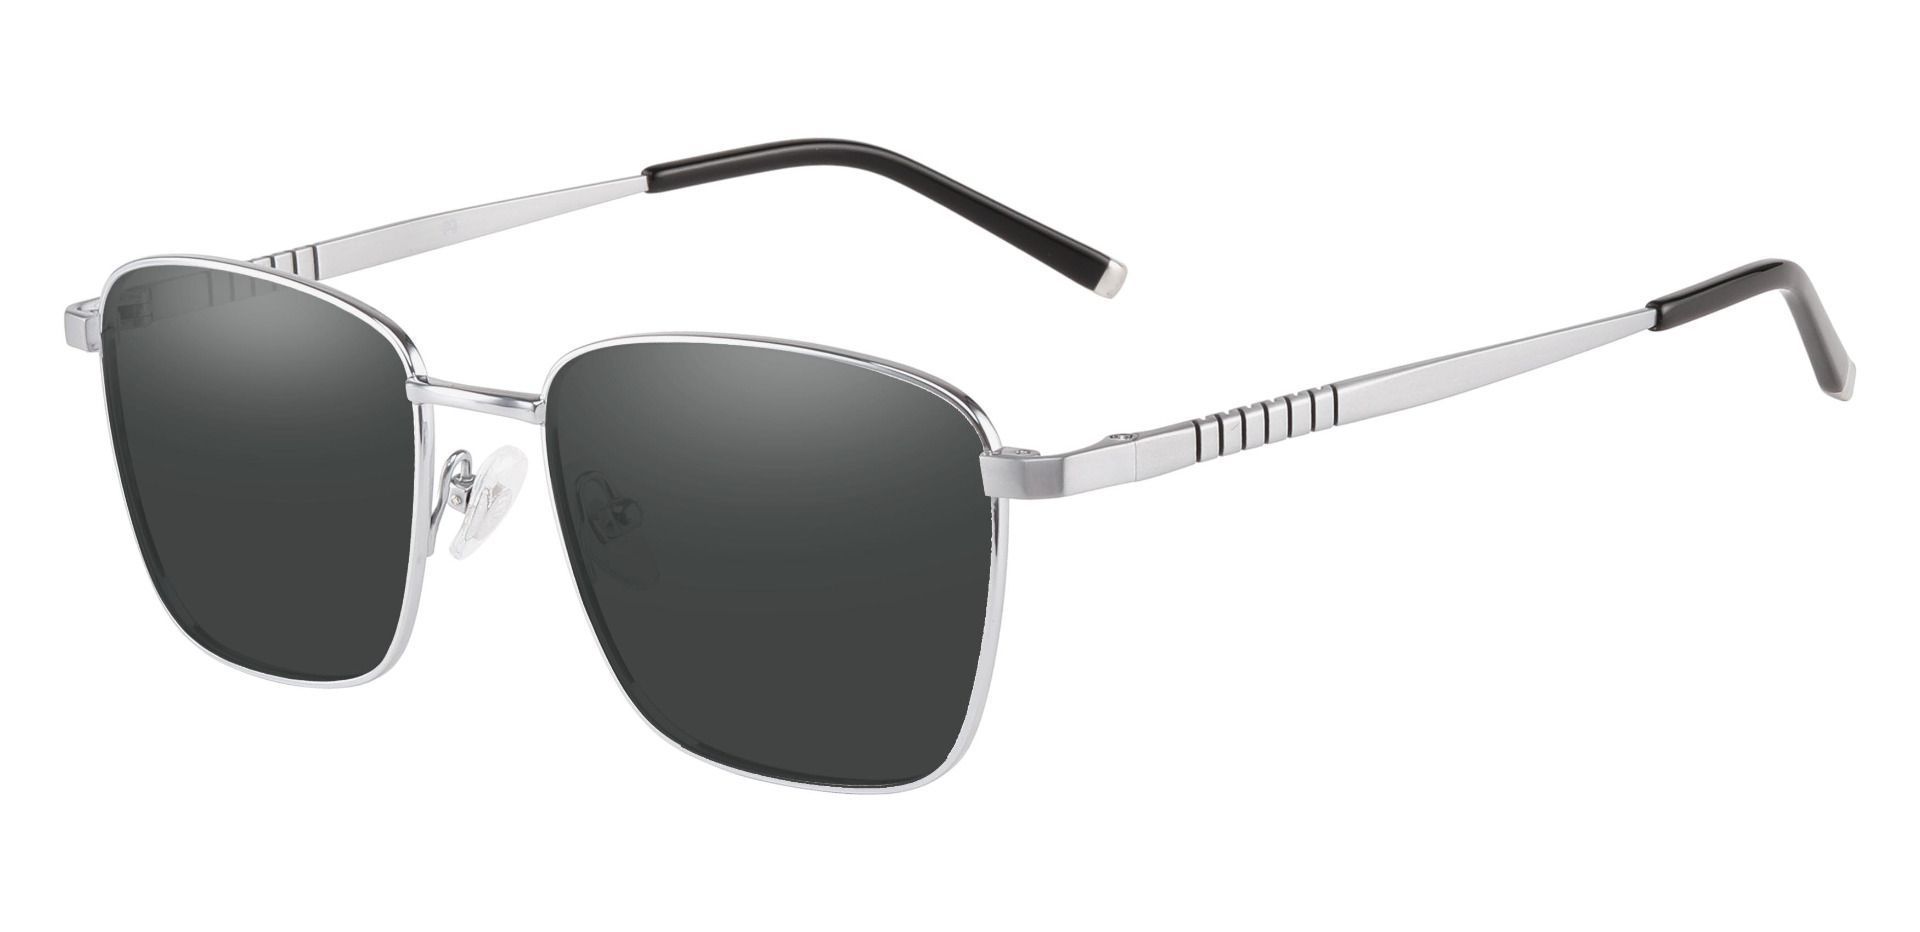 May Square Reading Sunglasses - Silver Frame With Gray Lenses